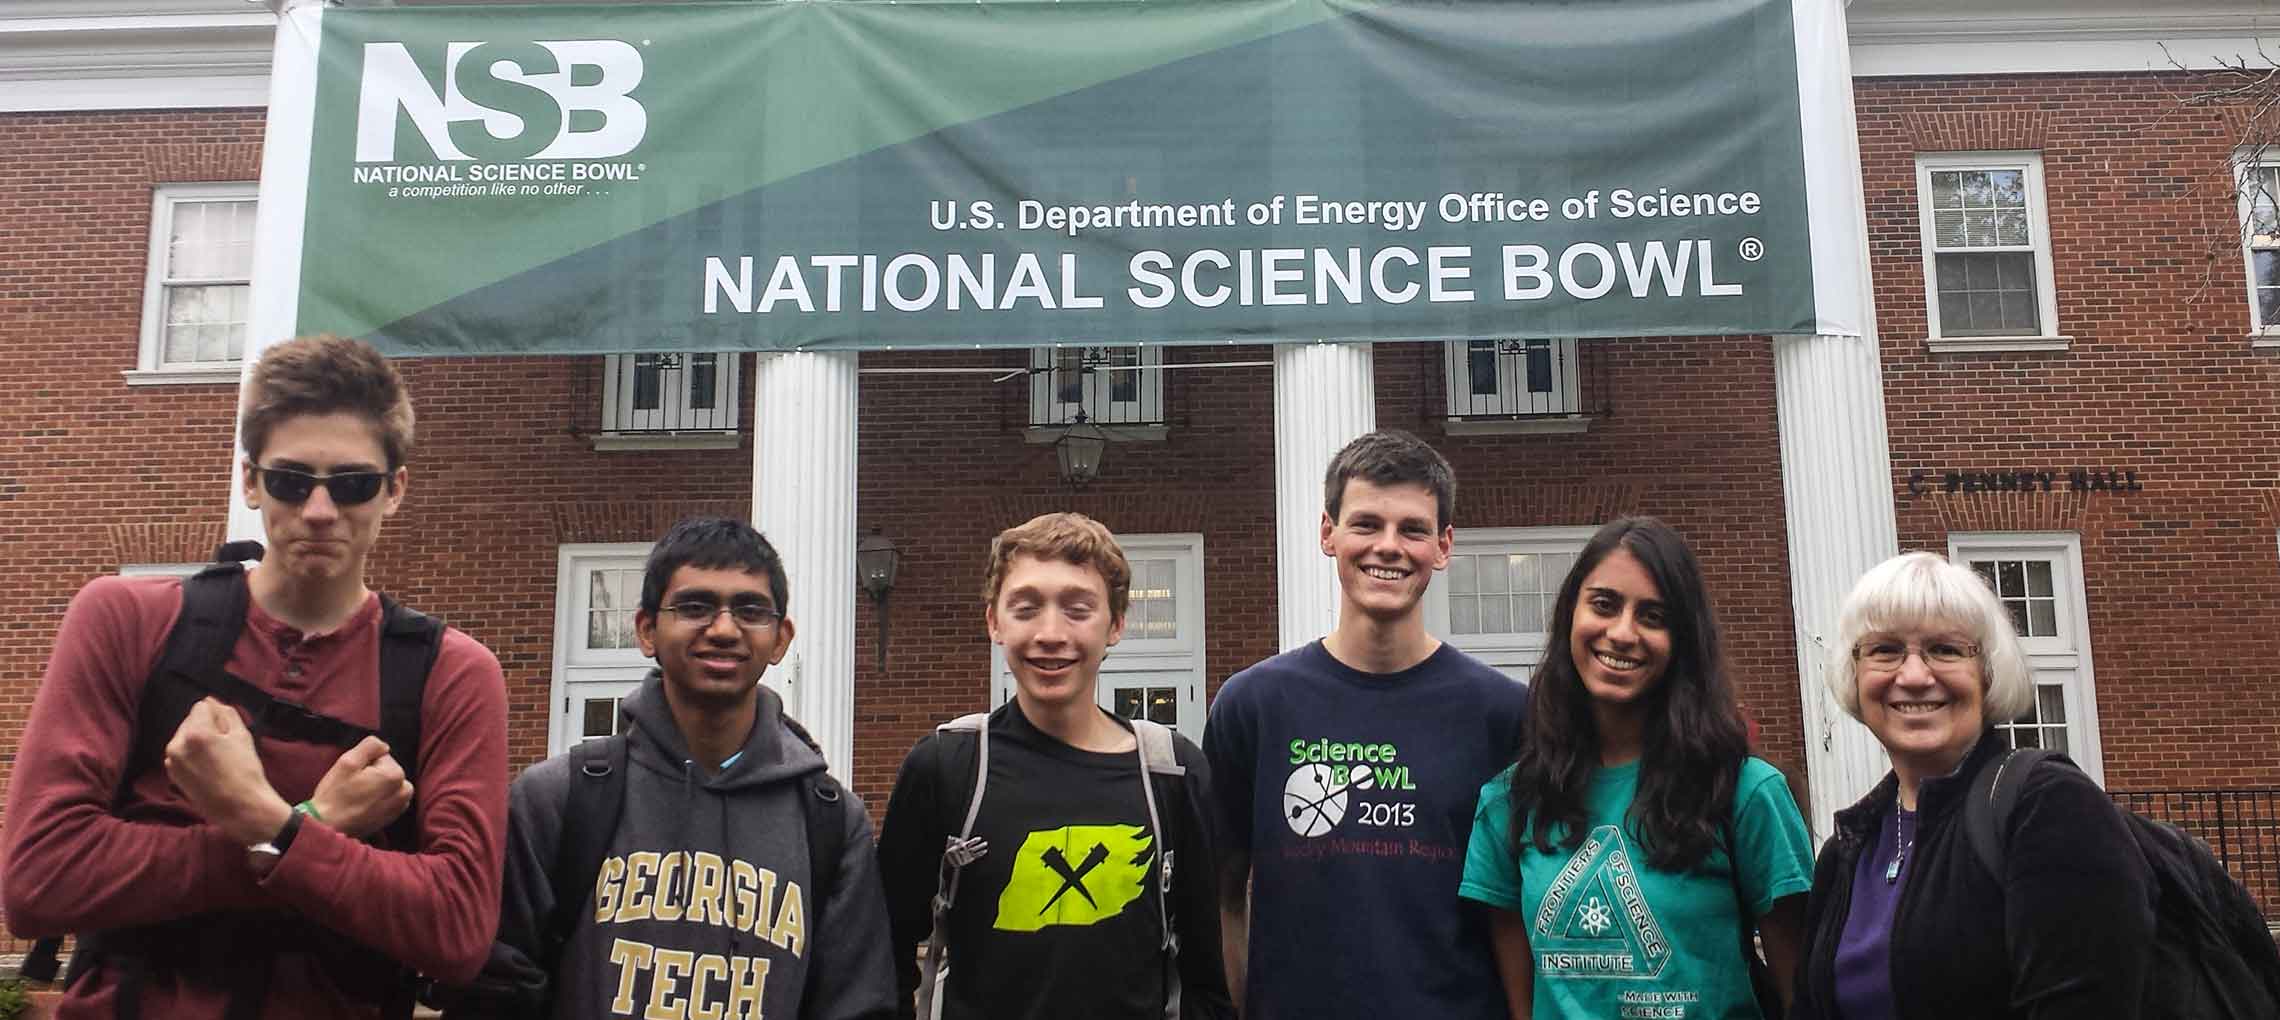 Photo shows five students and their coach standing beneath a banner for the National Science Bowl.